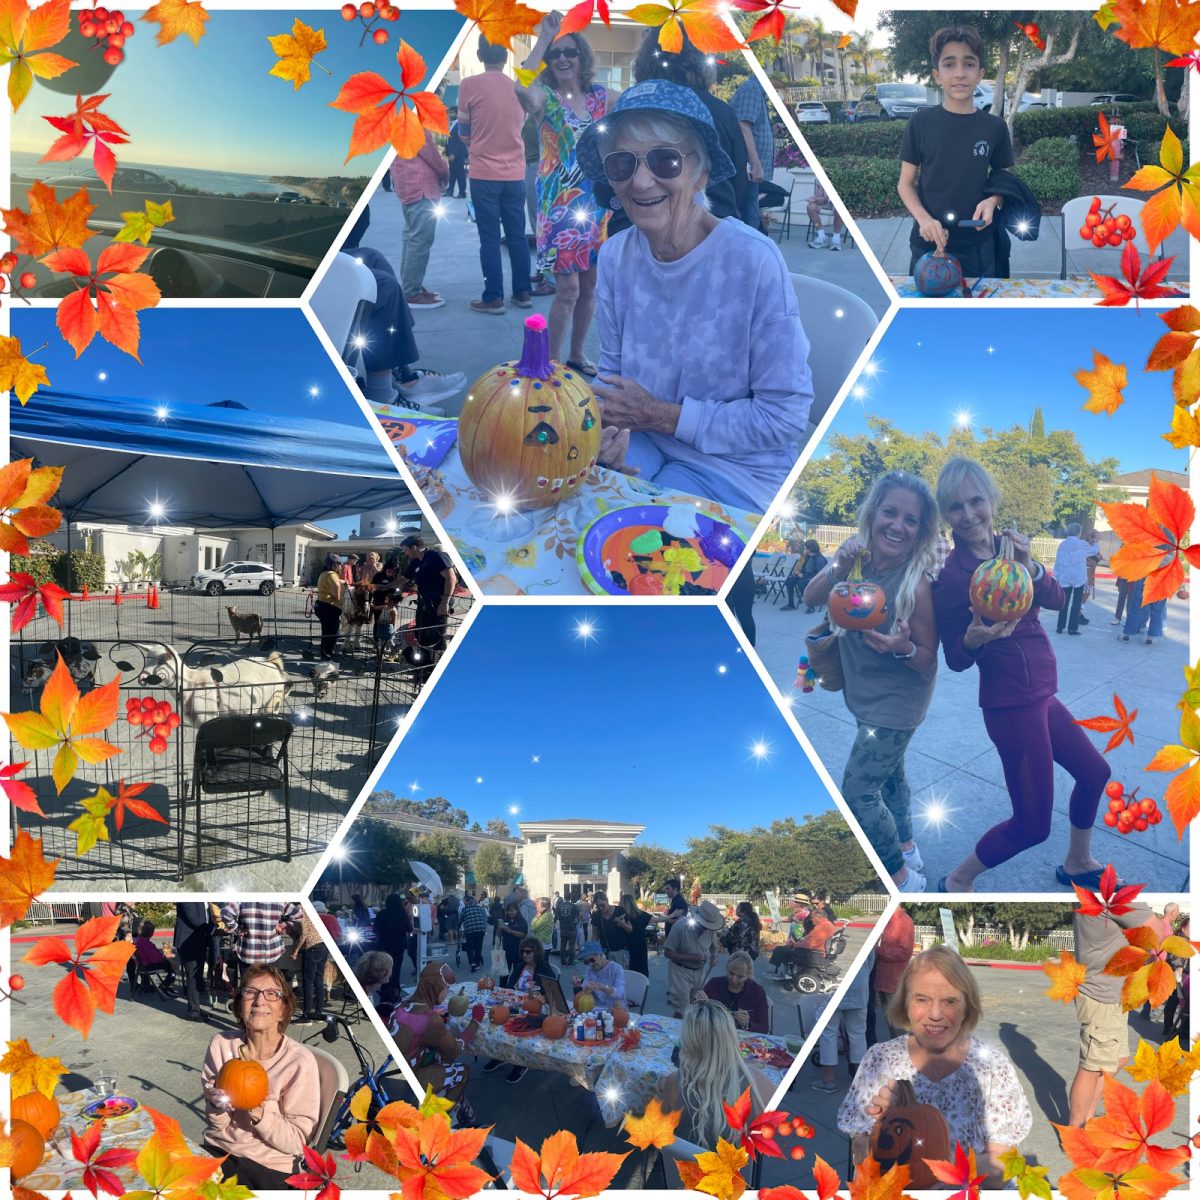 The community enjoying their time at the fall-themed festival.Photo Courtesy of Sophia Aghakhani, edited on PicsArt